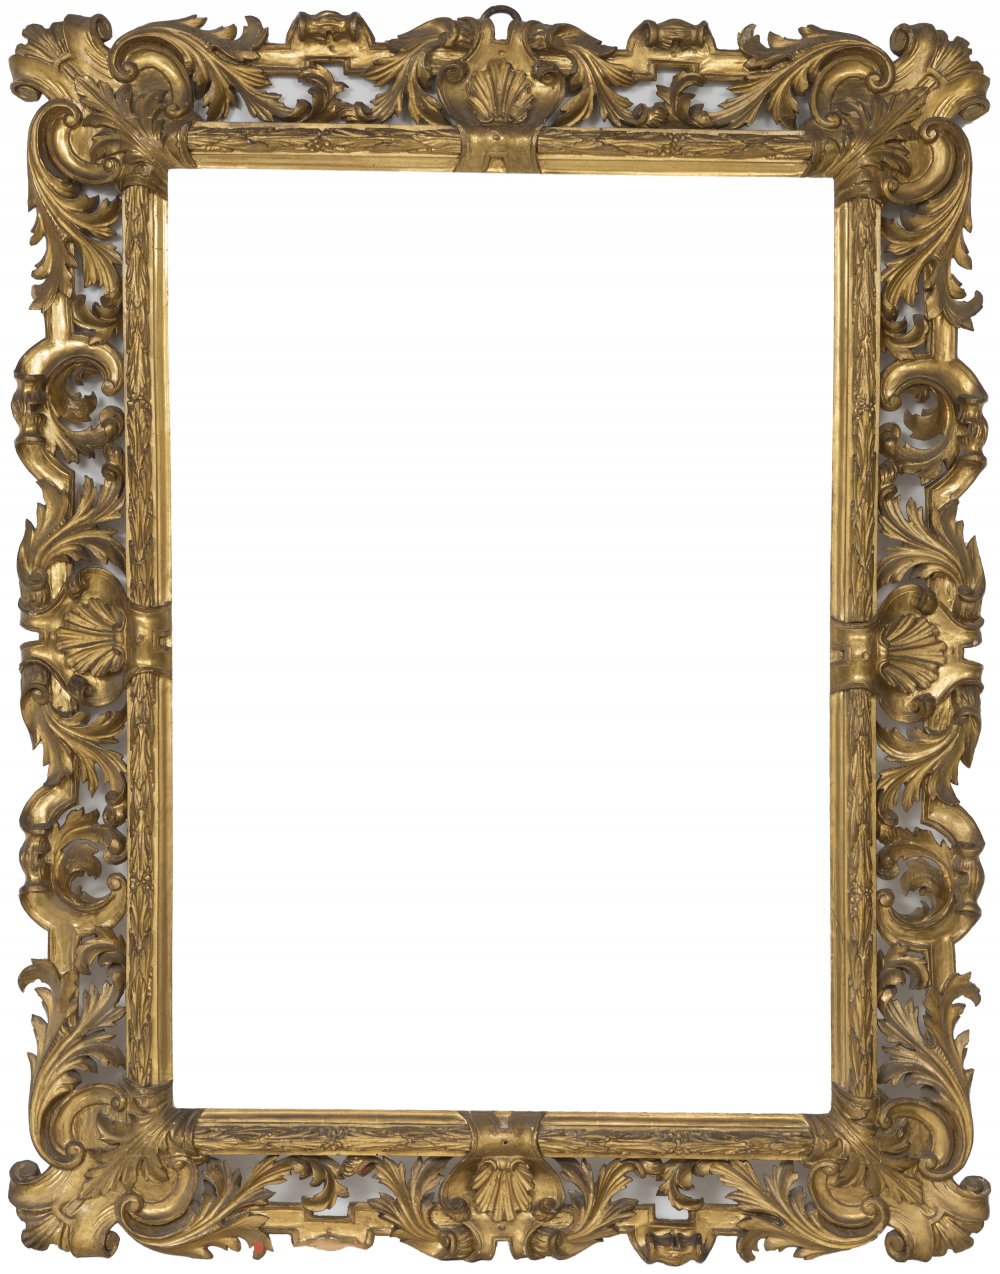 Frame; Italy, circa 1725.Carved and gilded wood.Provenance: private collection conceived from the